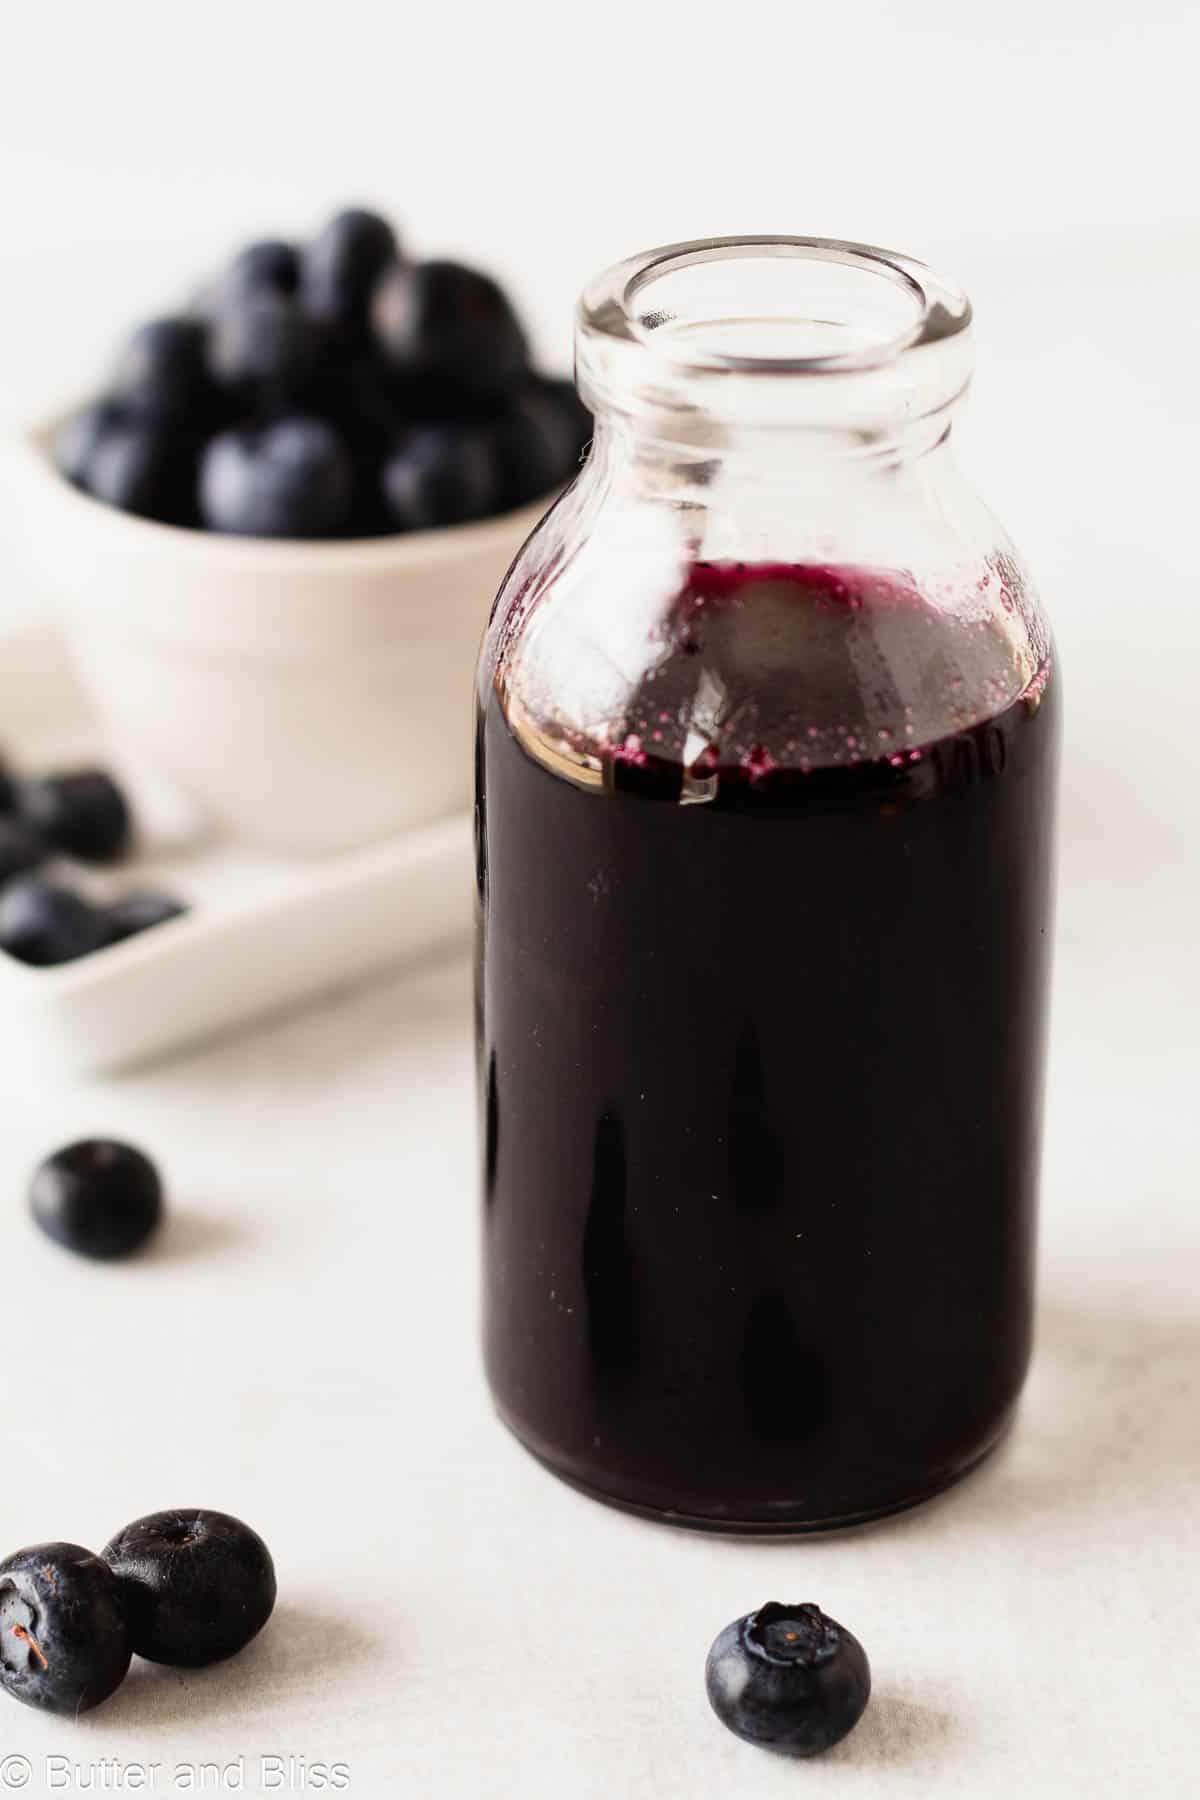 Homemade blueberry lemonade syrup in a small glass jar.